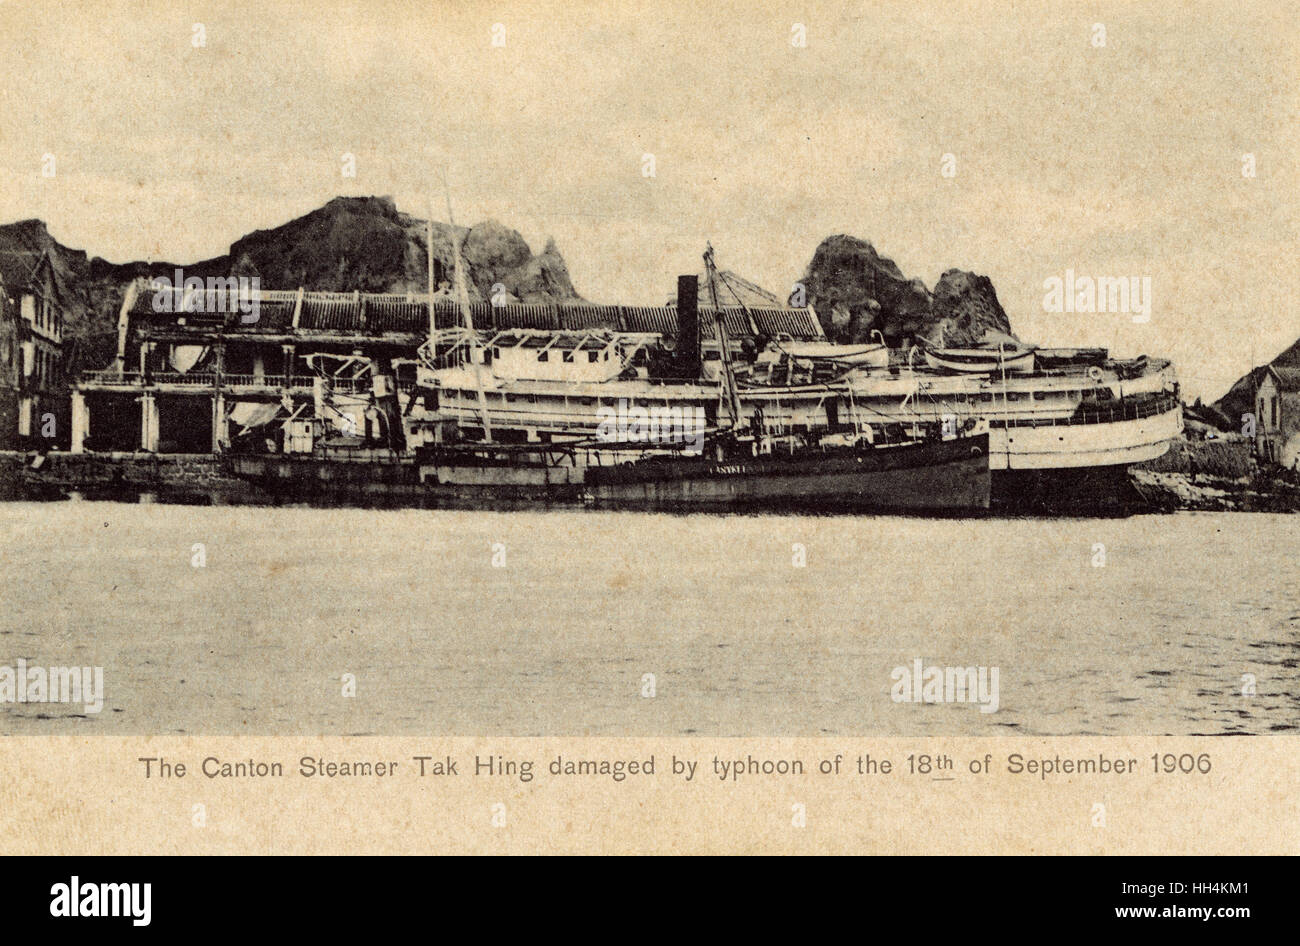 The Canton Steamer Tak Hing run aground and damaged during the Typhoon of 18th September 1906 at Hong Kong. Stock Photo